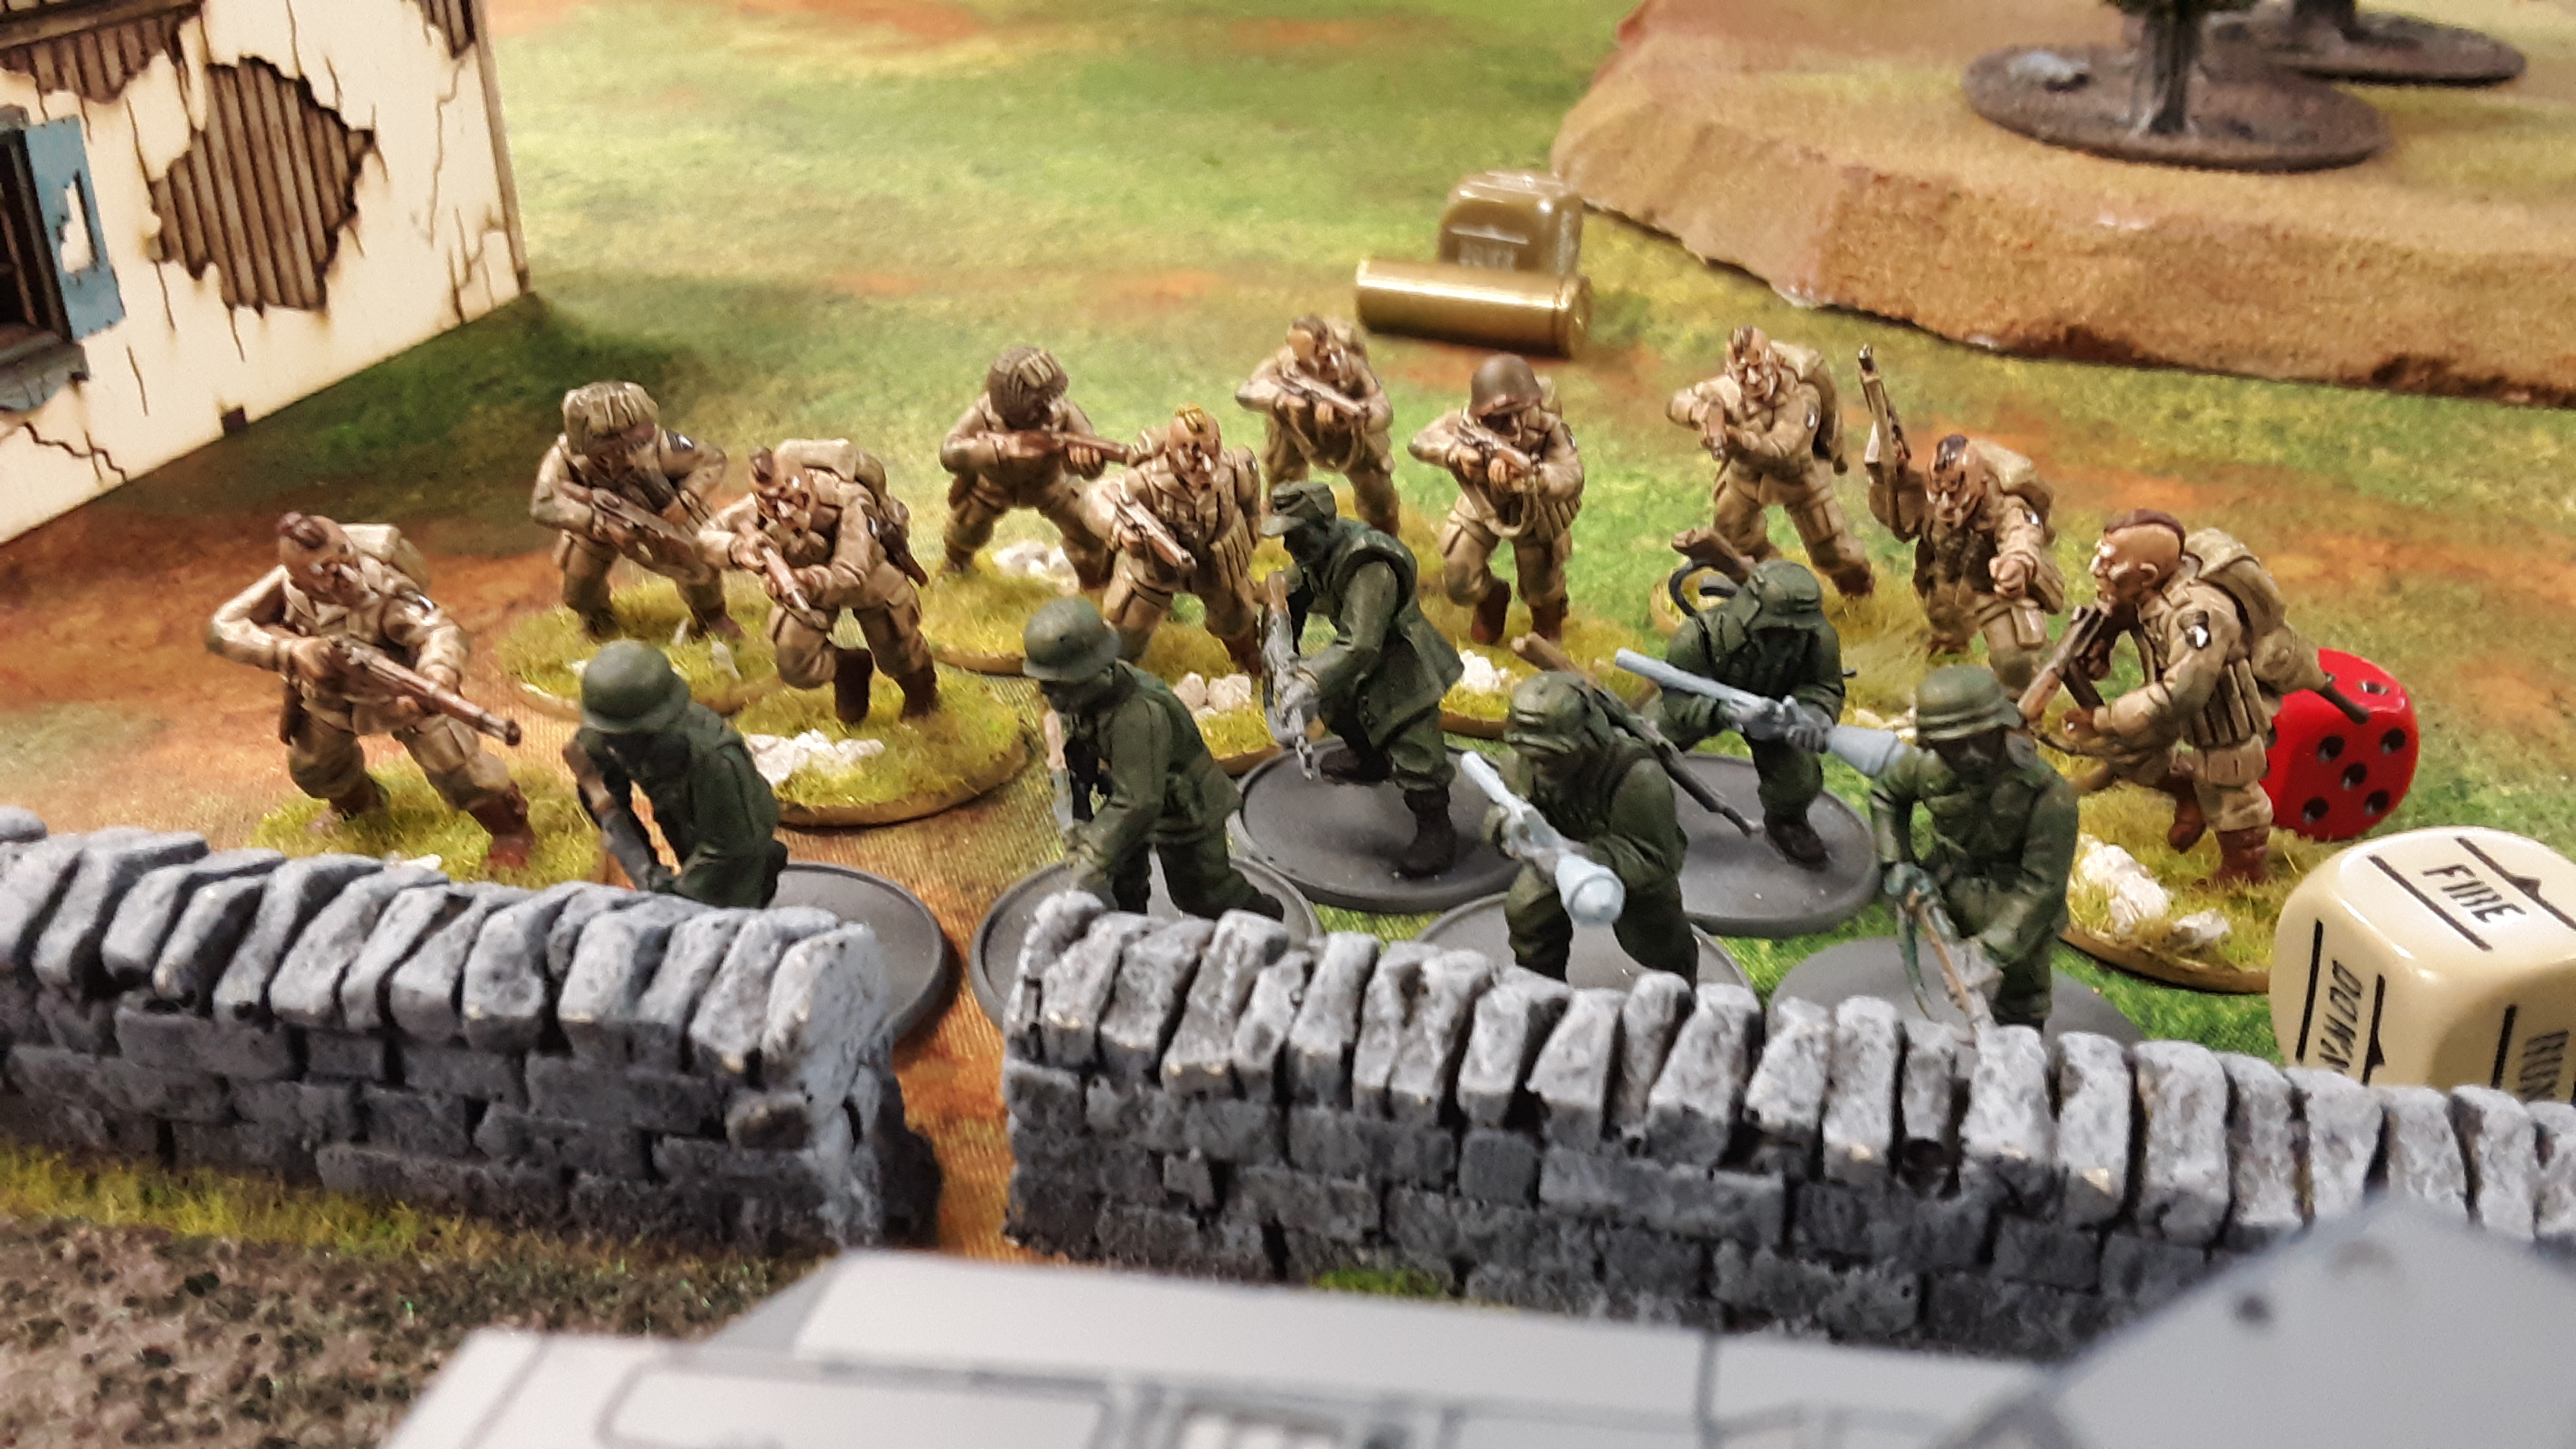 289th Infantry Regiment versus 2nd SS Panzer Division in a fierce infantry engagement